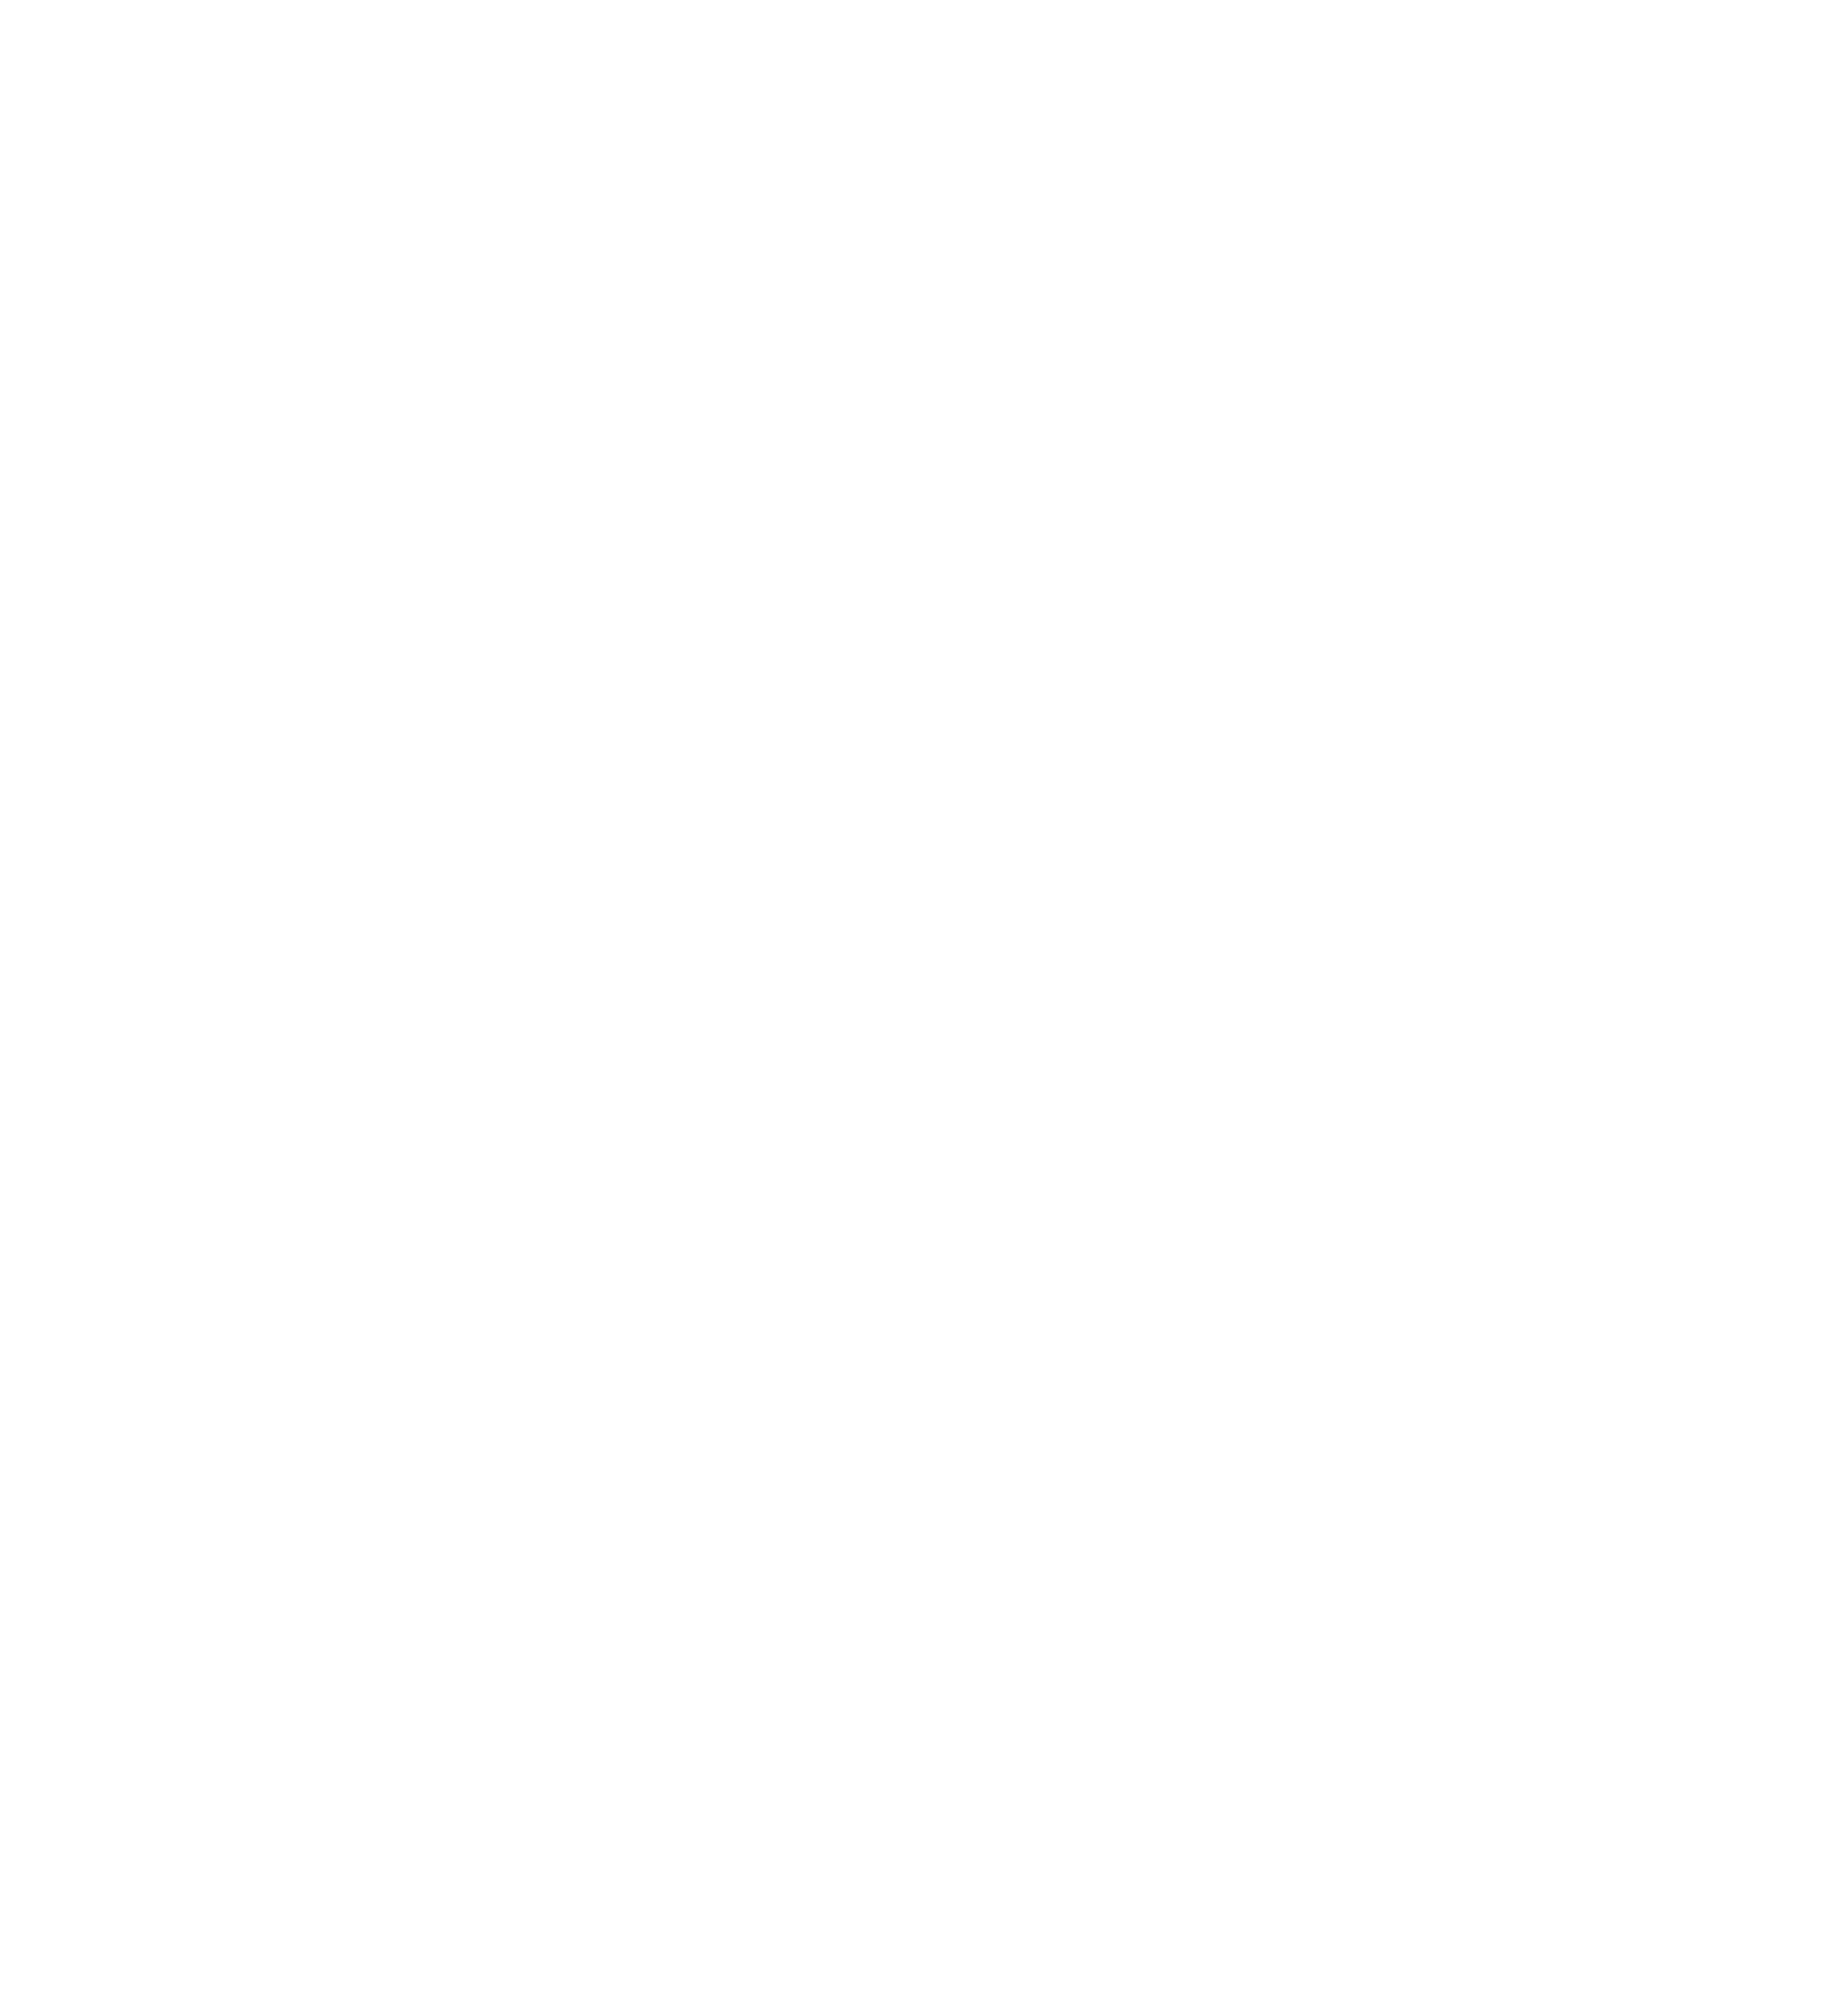 norrys coffee ノーリーズ コーヒー